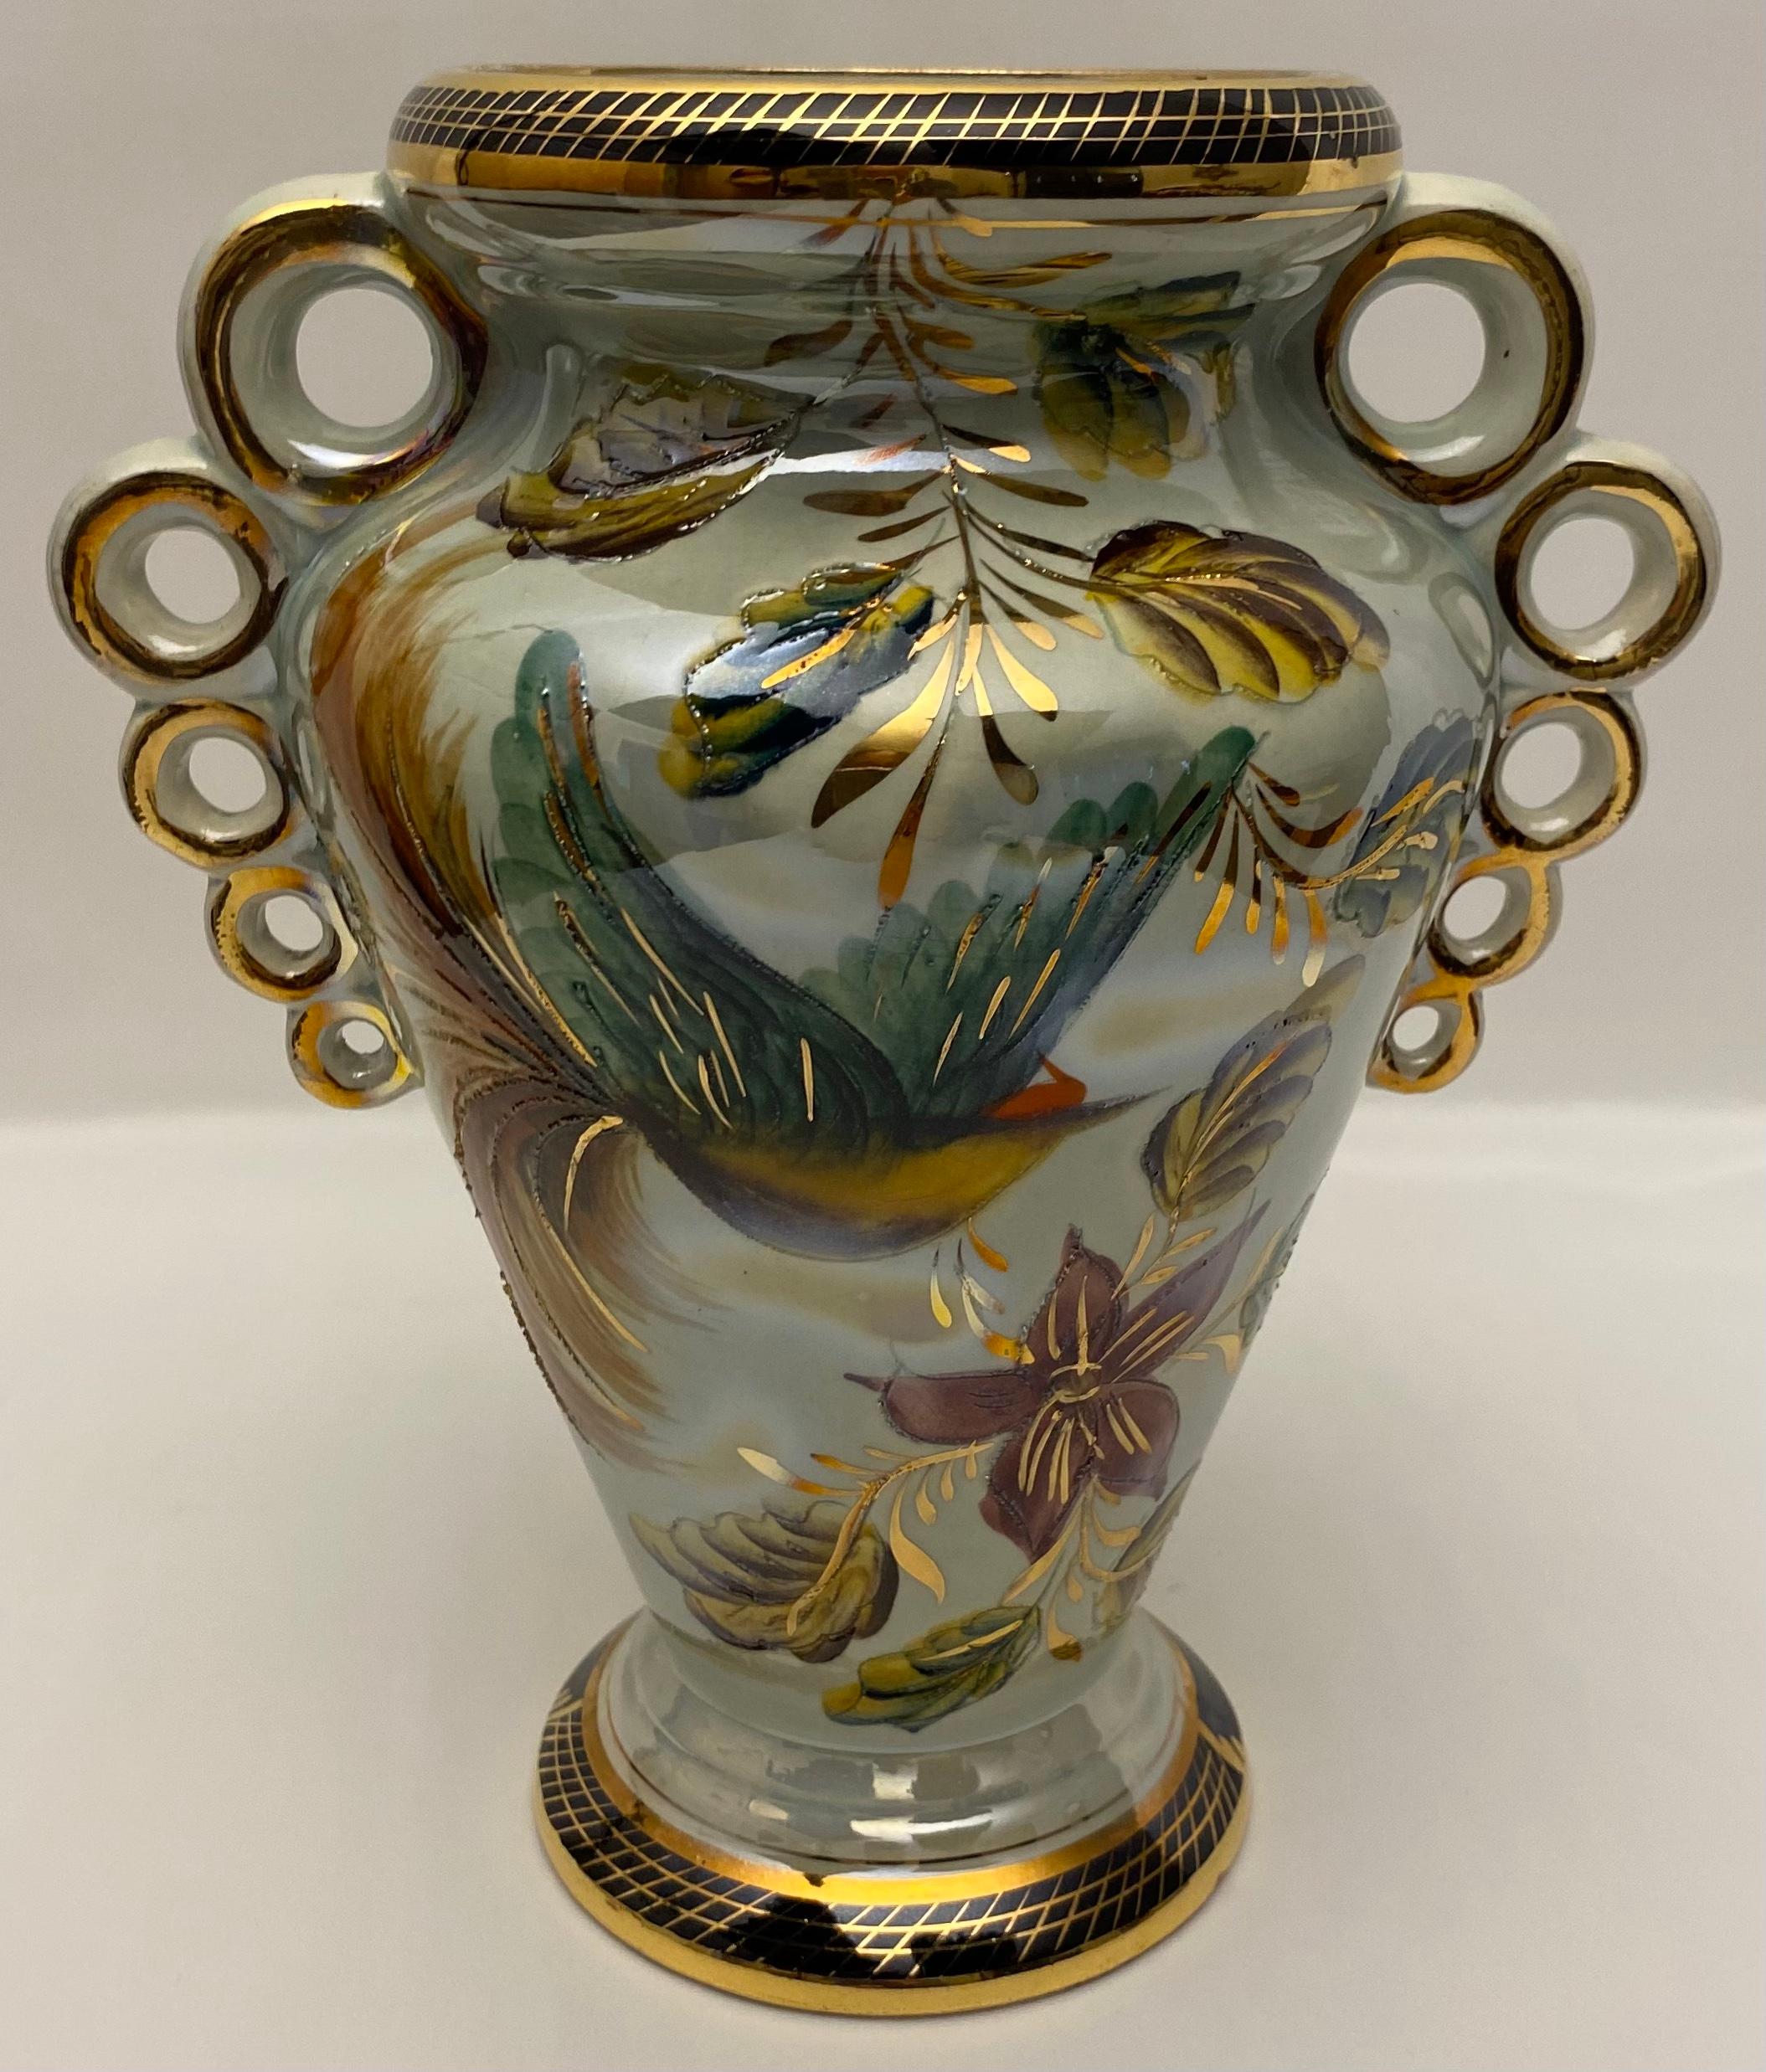 A celadon colored porcelain floral motif vase, by H. Bequet Quaregnon, Belgium, c. 1940. This decorative vase would look great displayed in an array of interior styes. 

The celadon and gold trimmed vase is heavily decorated throughout with a